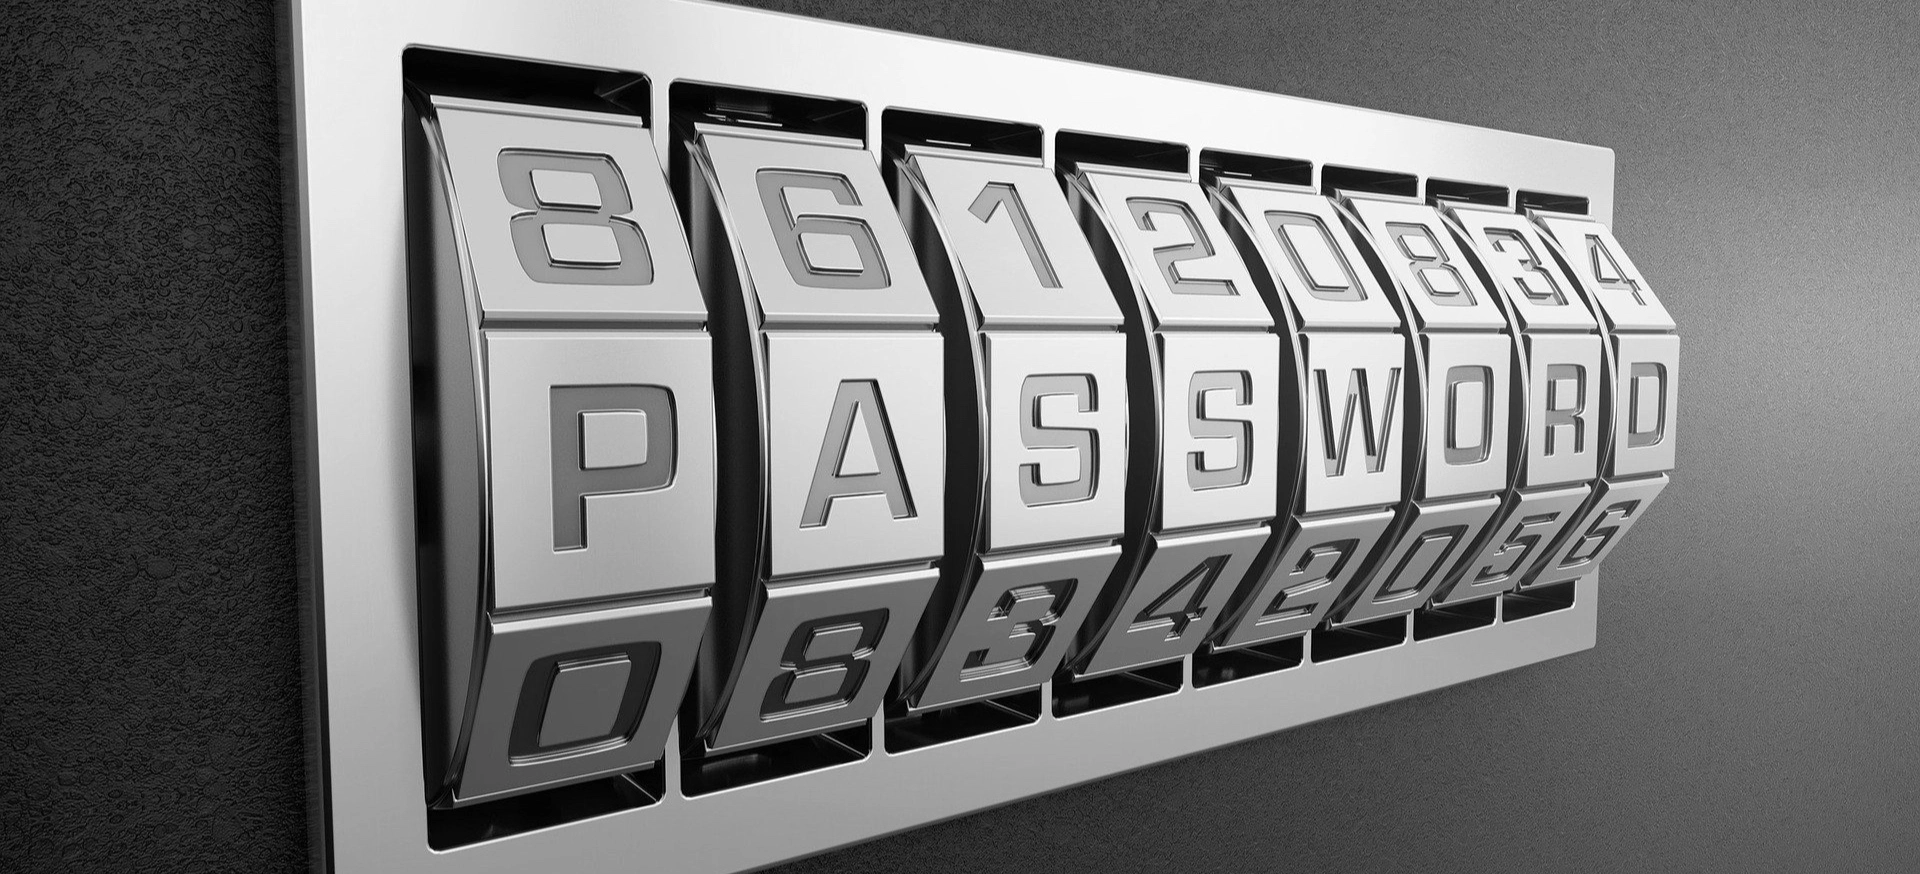 Password combination lock image by Gino Crescoli from Pixabay.